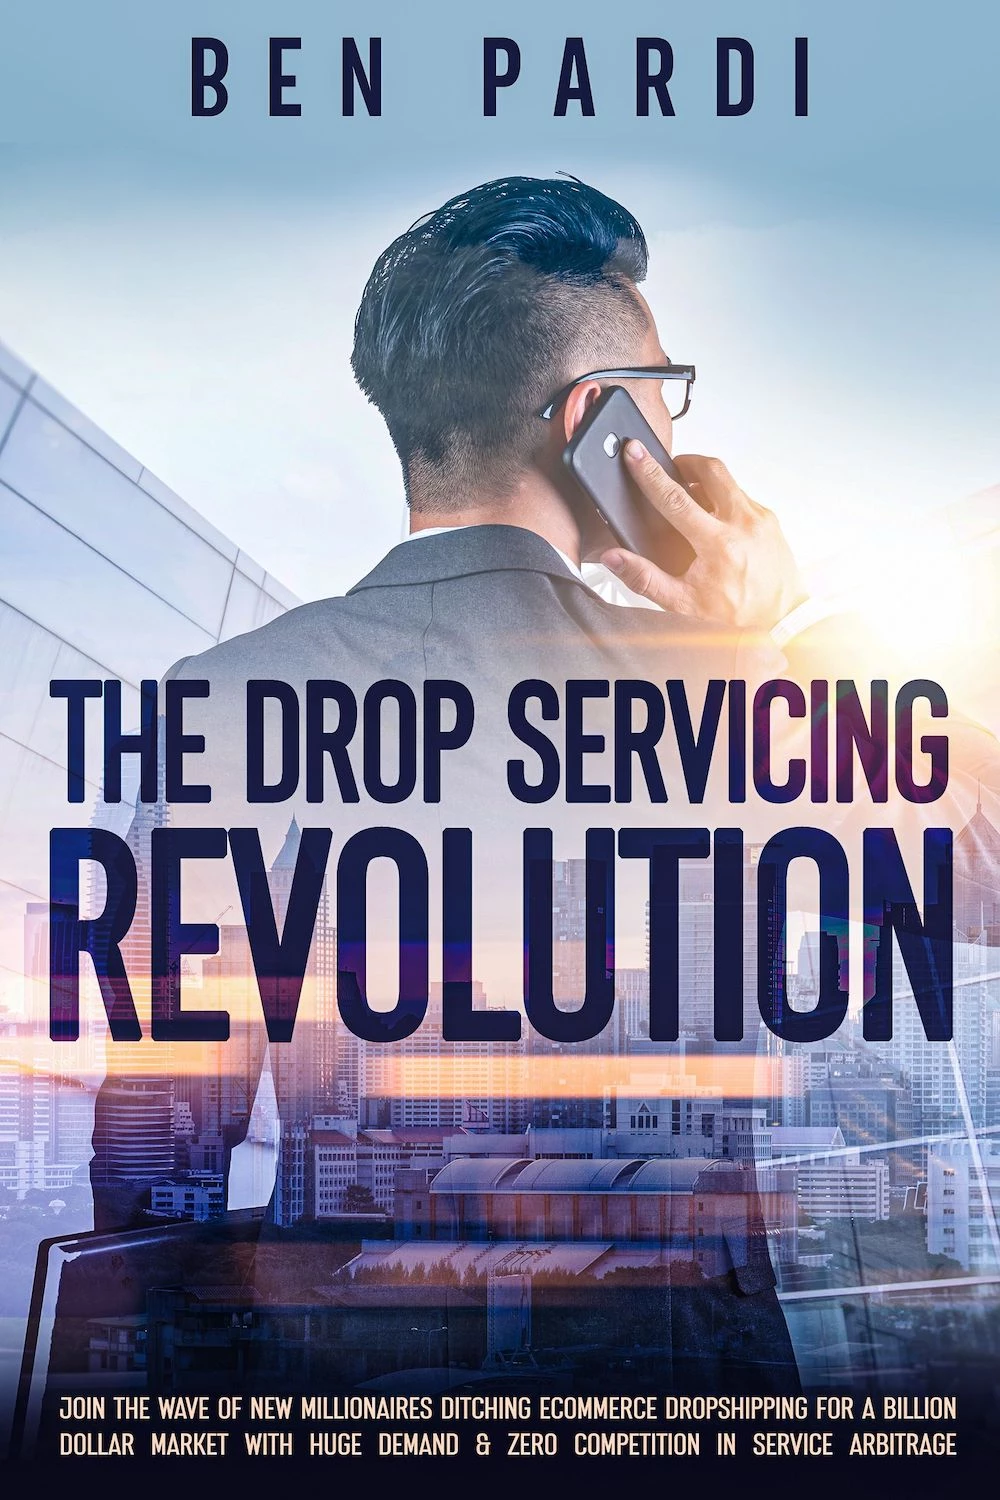 The Drop Servicing Revolution: Join the Wave of New Millionaires Ditching Ecommerce Dropshipping for a Billion Dollar Market With Huge Demand & Zero Competition in Service Arbitrage